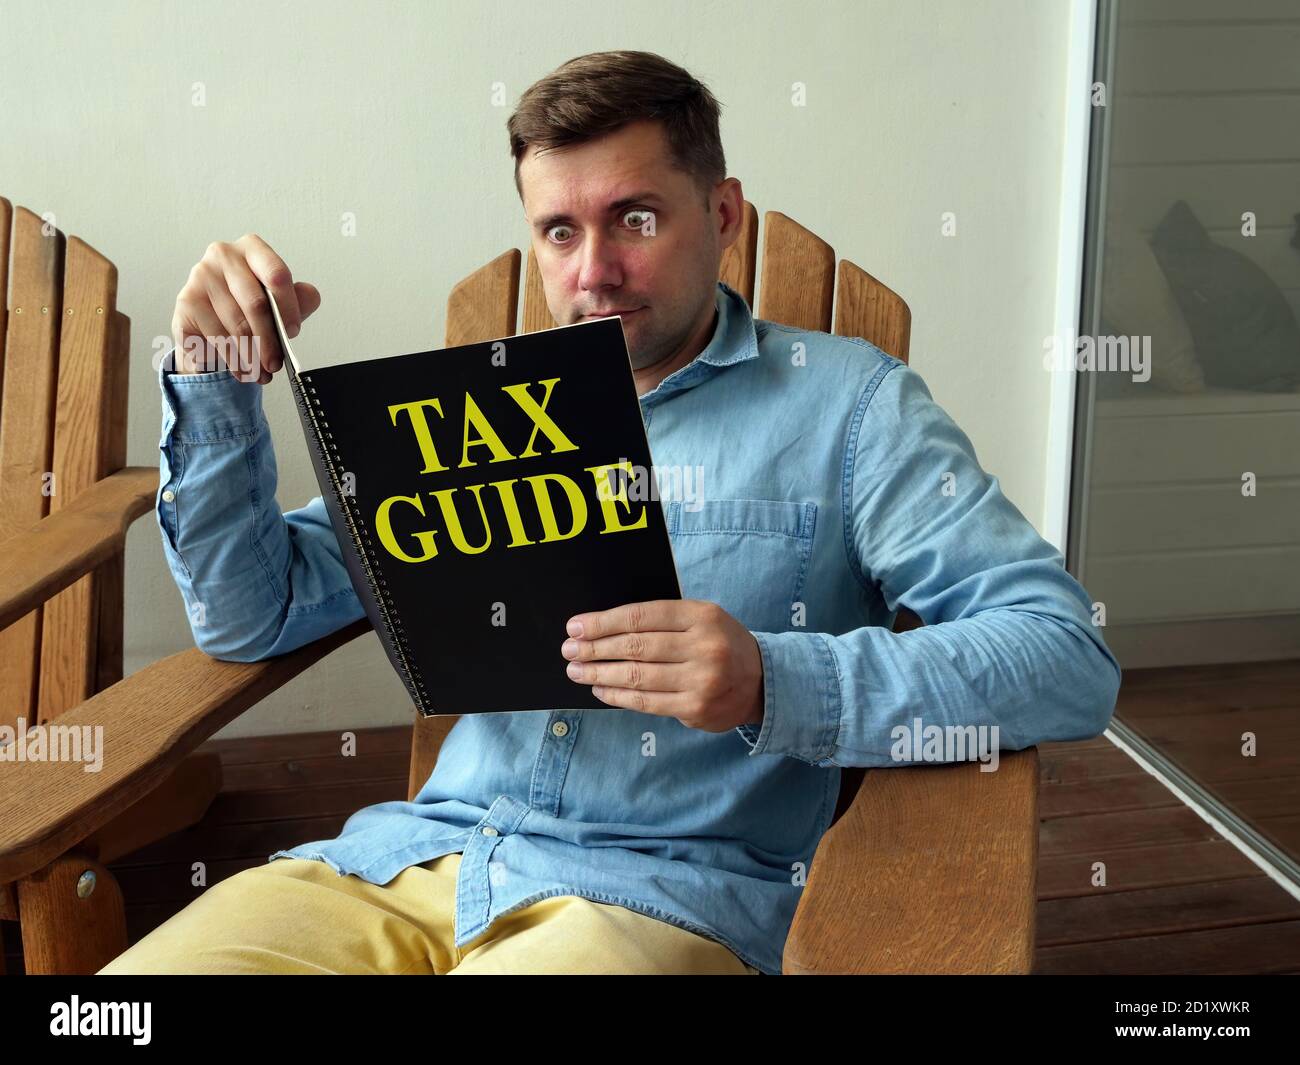 Tax guide concept. A guy sitting in a chair reads a book. Stock Photo